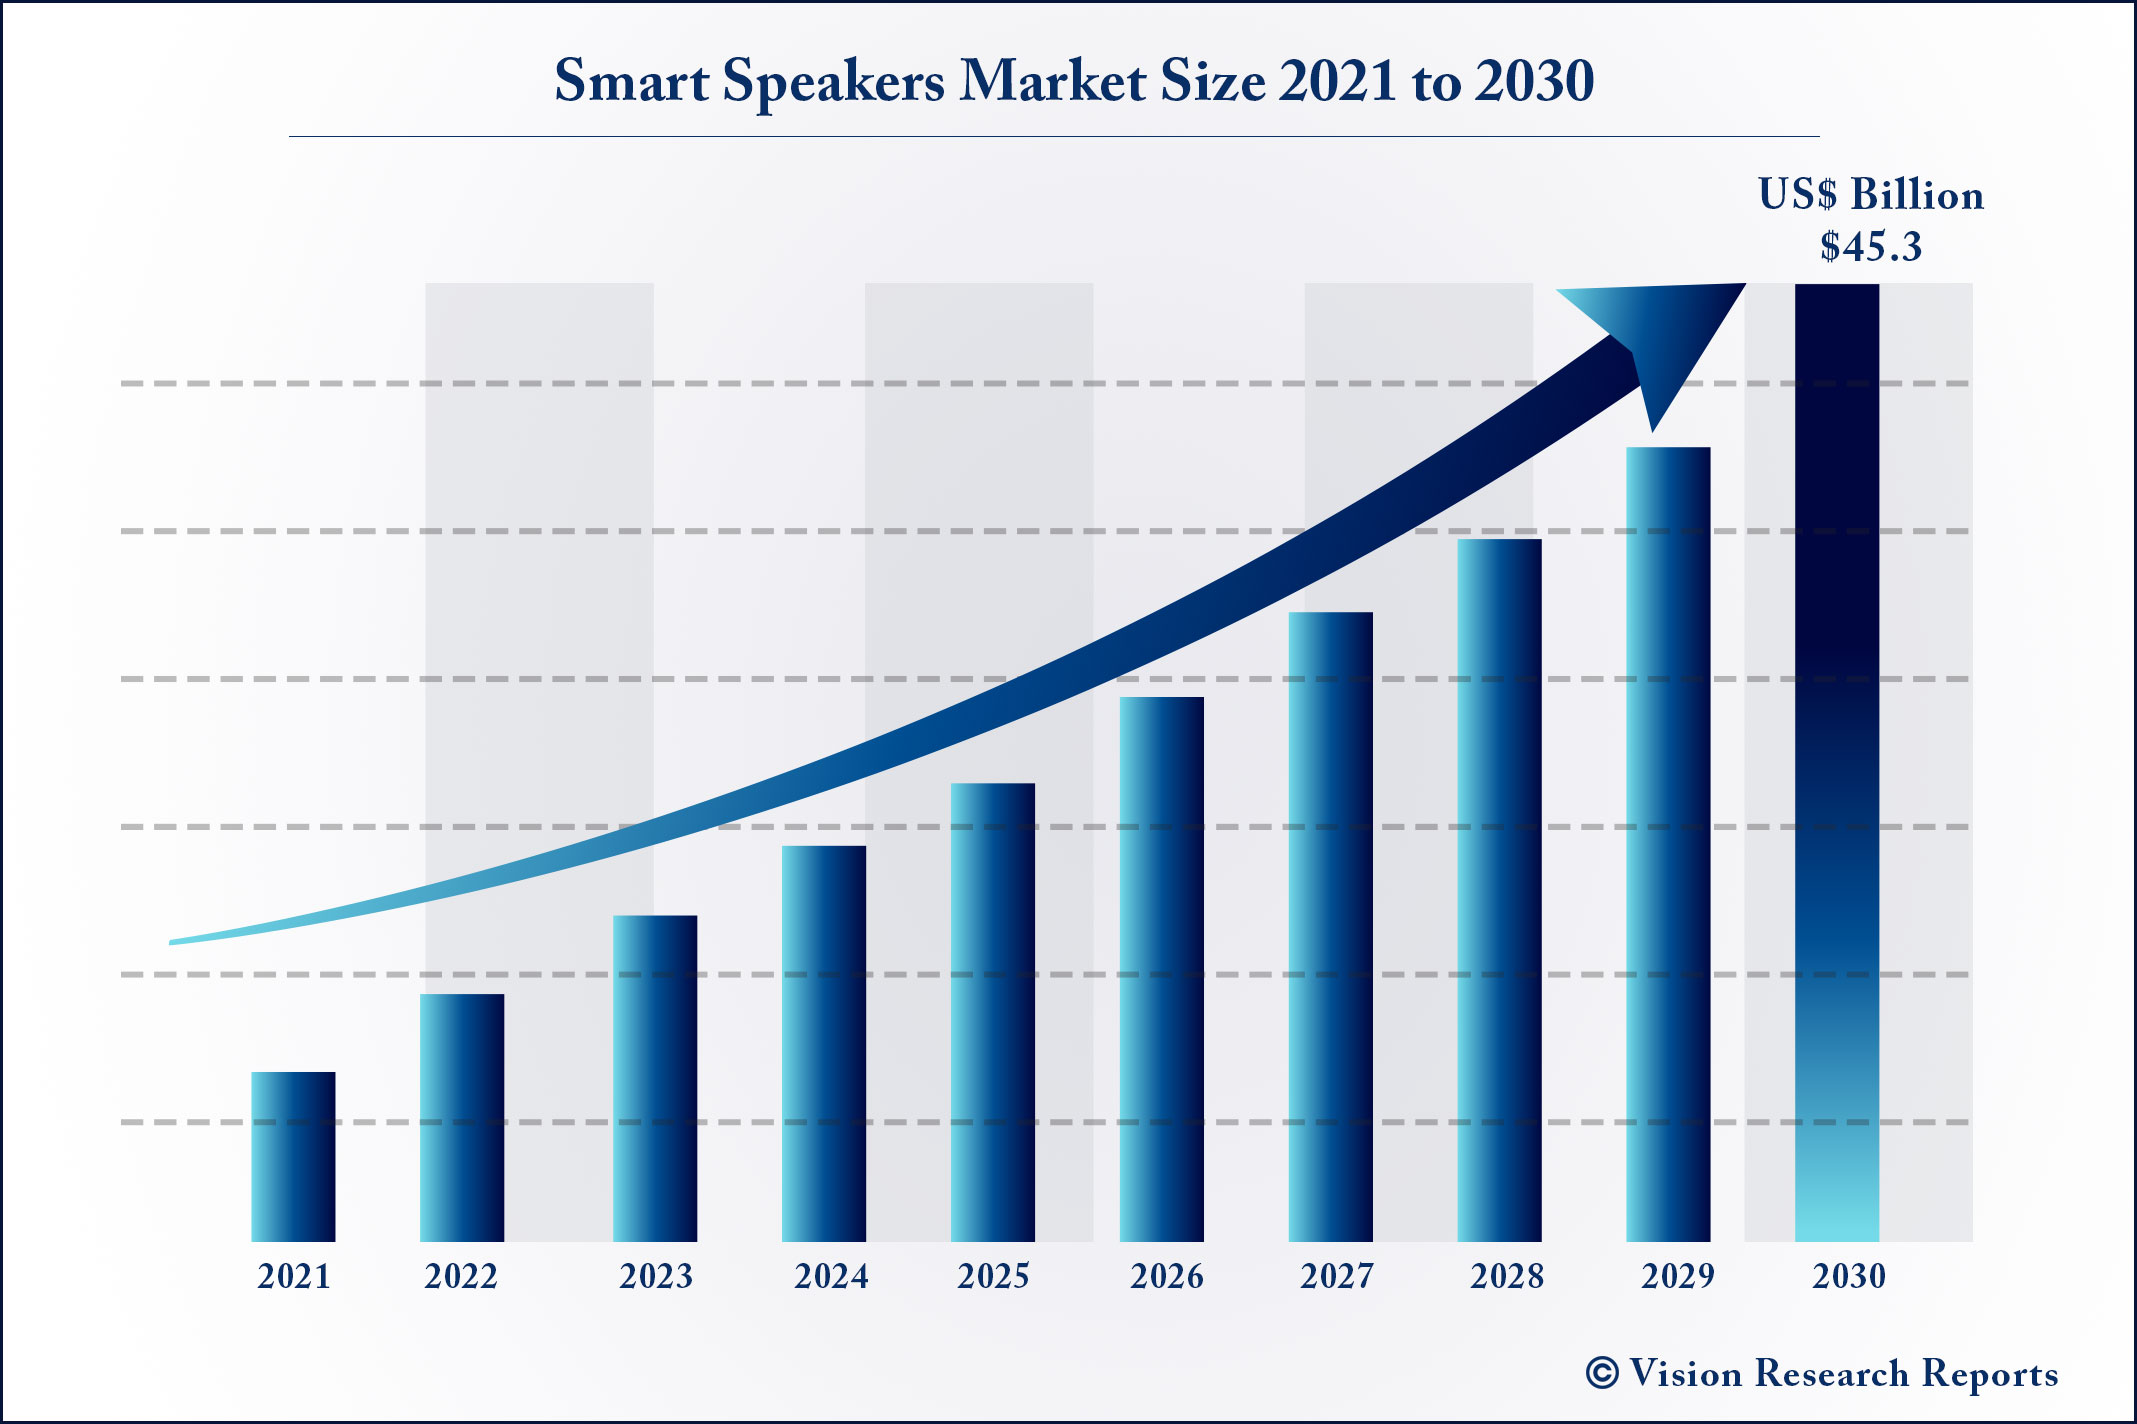 Smart Speakers Market Size 2021 to 2030